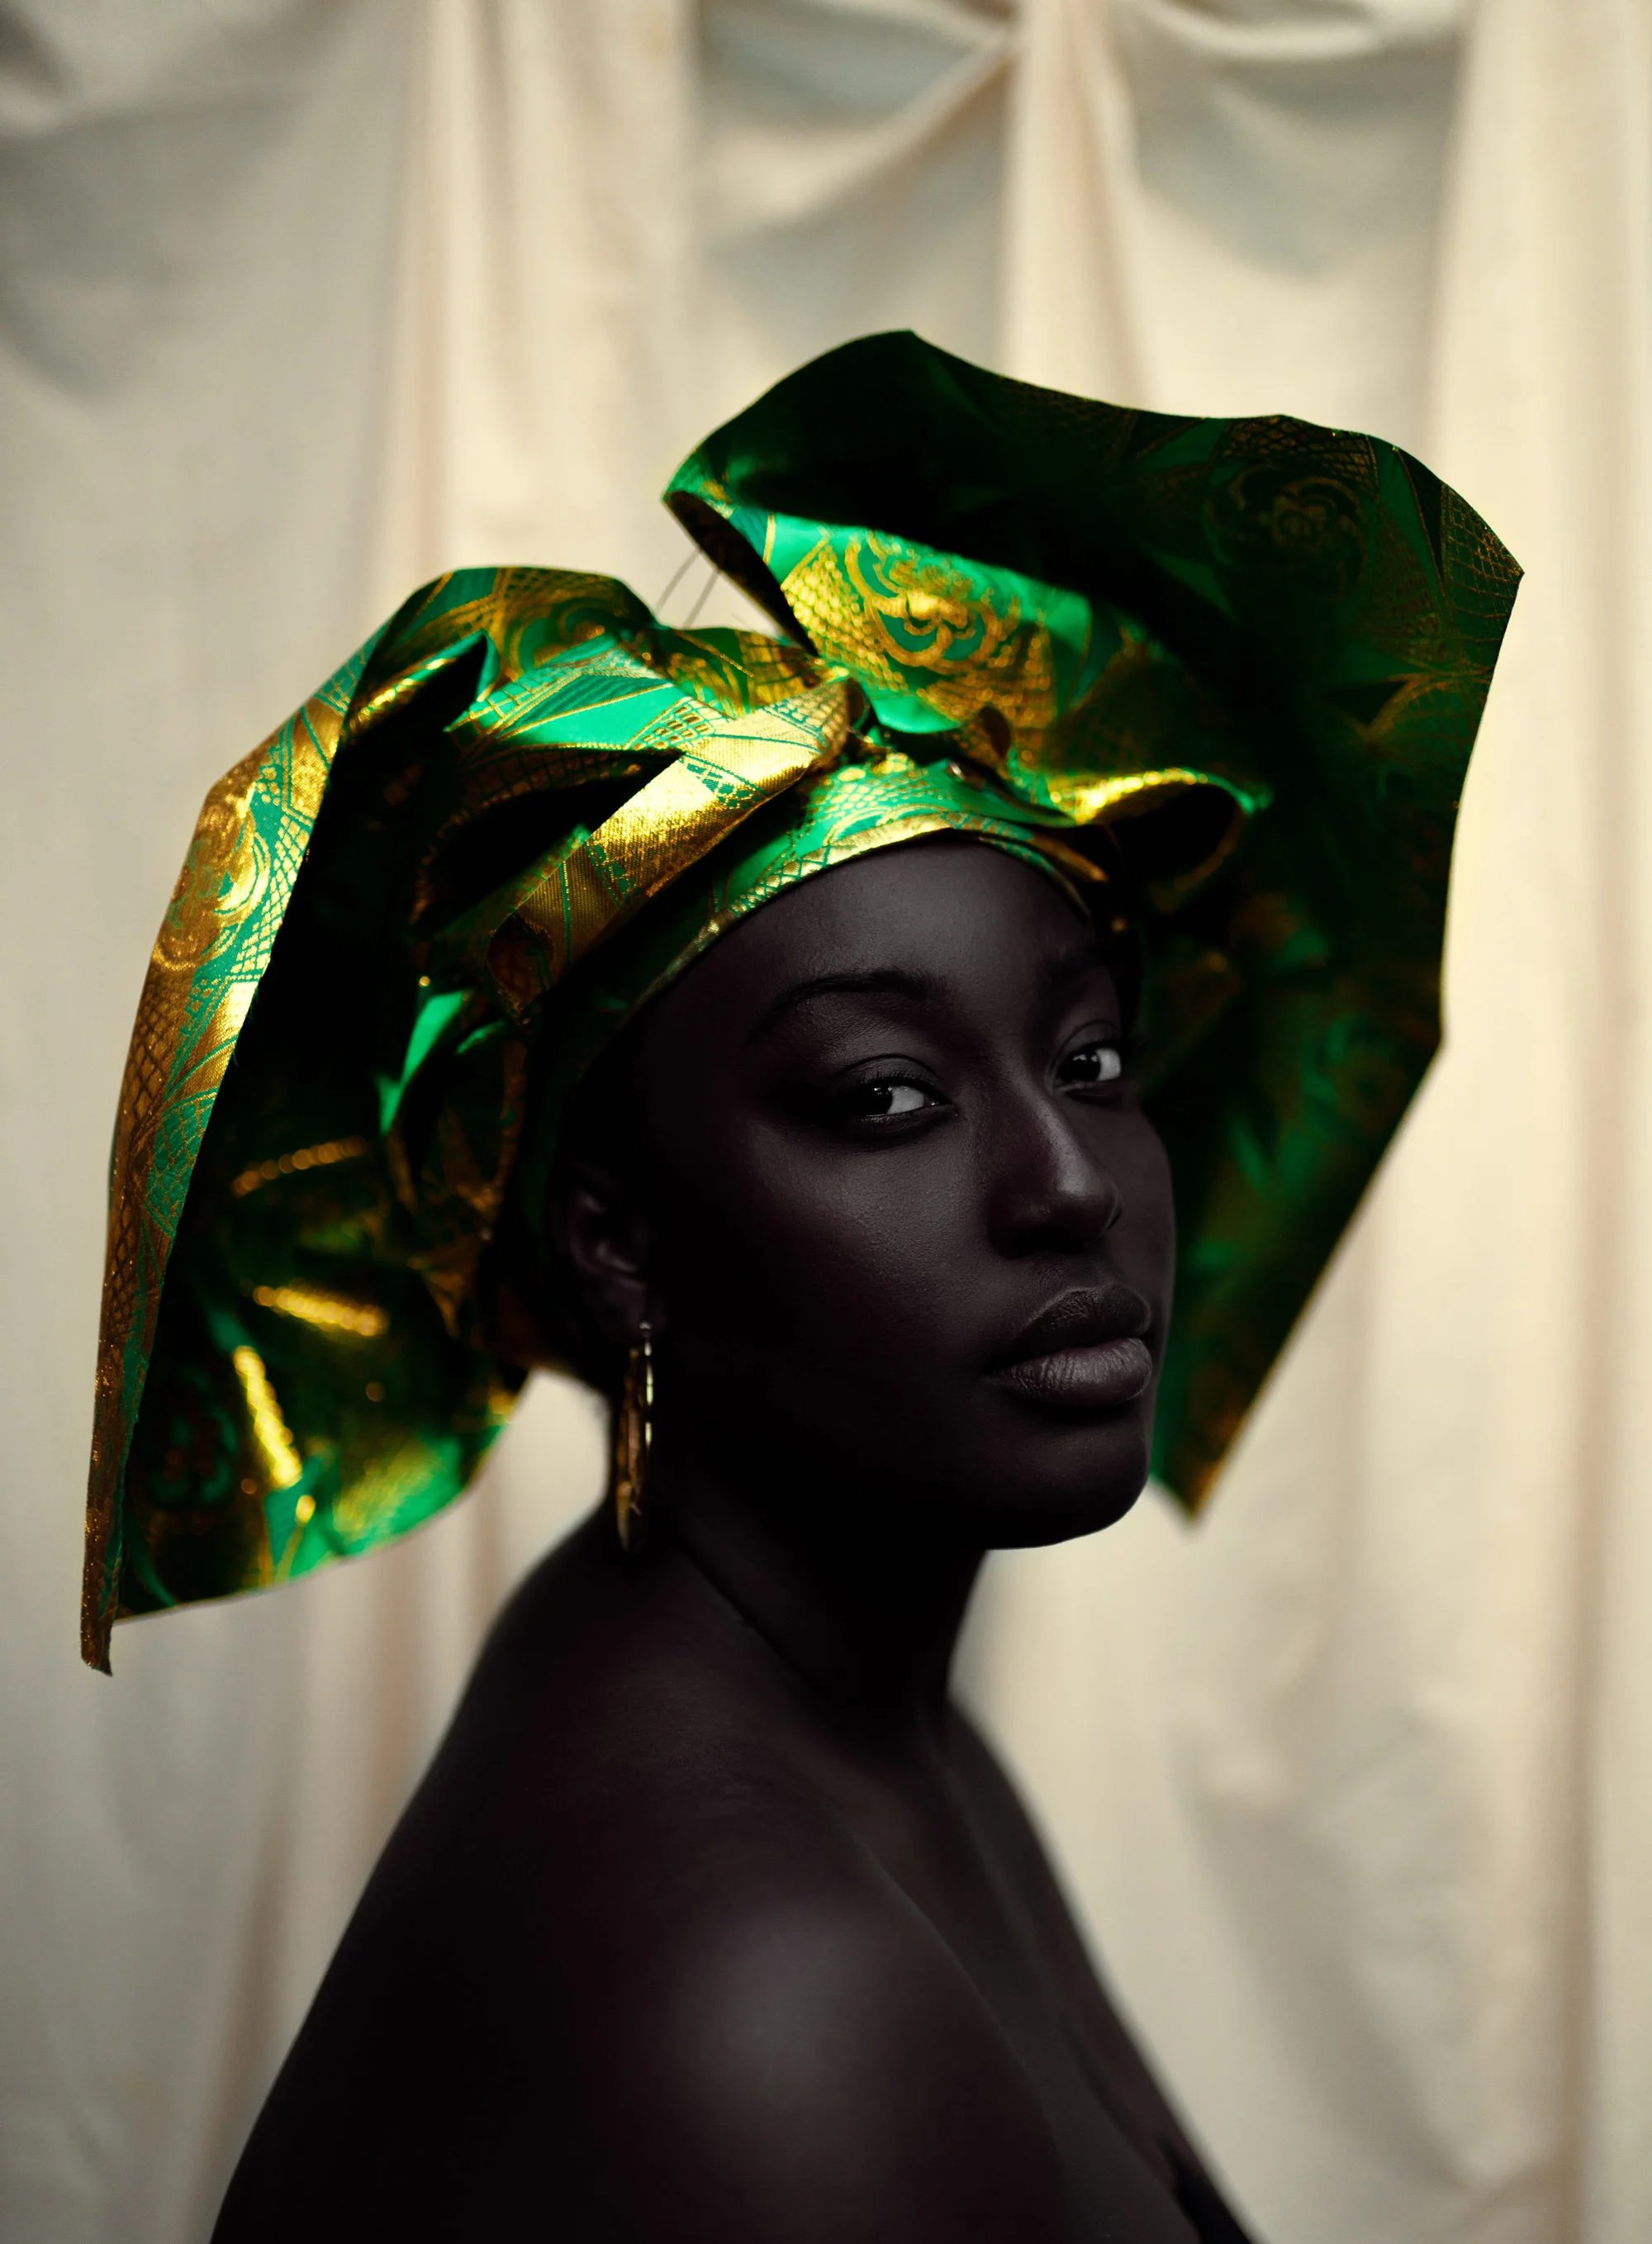 A photographic portrait of a woman wearing a green headpiece and a gold earring, sitting sideways but looking towards the camera.